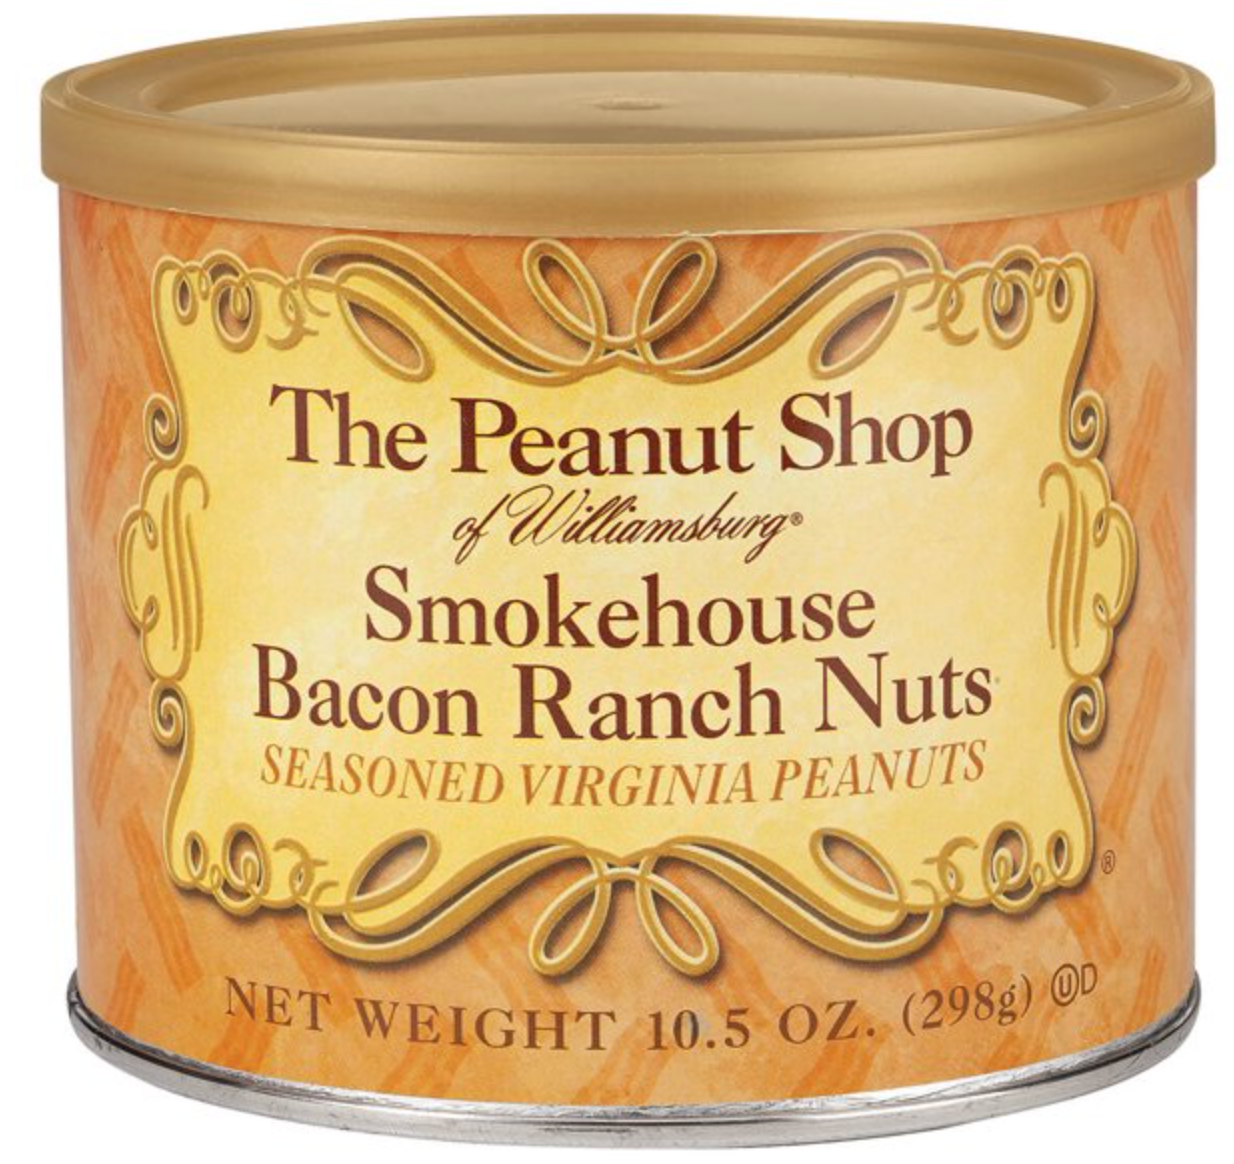 Seasoned Peanuts - Smokehouse Bacon and Cheddar by The Peanut Shop